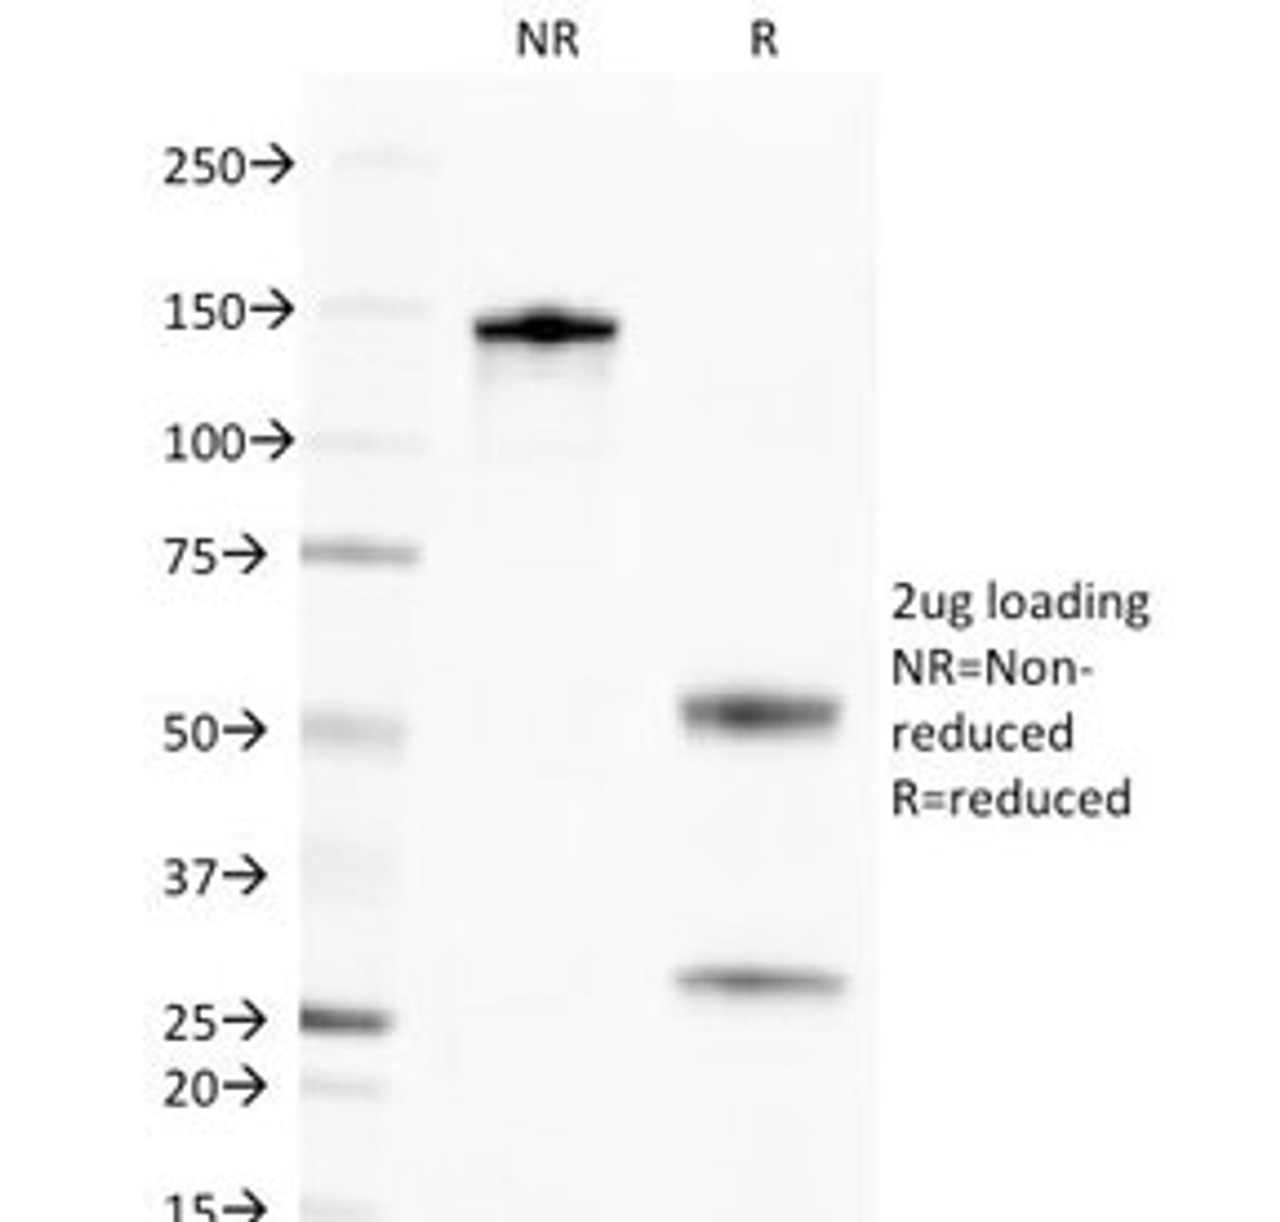 SDS-PAGE Analysis of Purified, BSA-Free Golgi Complex Antibody (clone 371-4) . Confirmation of Integrity and Purity of the Antibody.